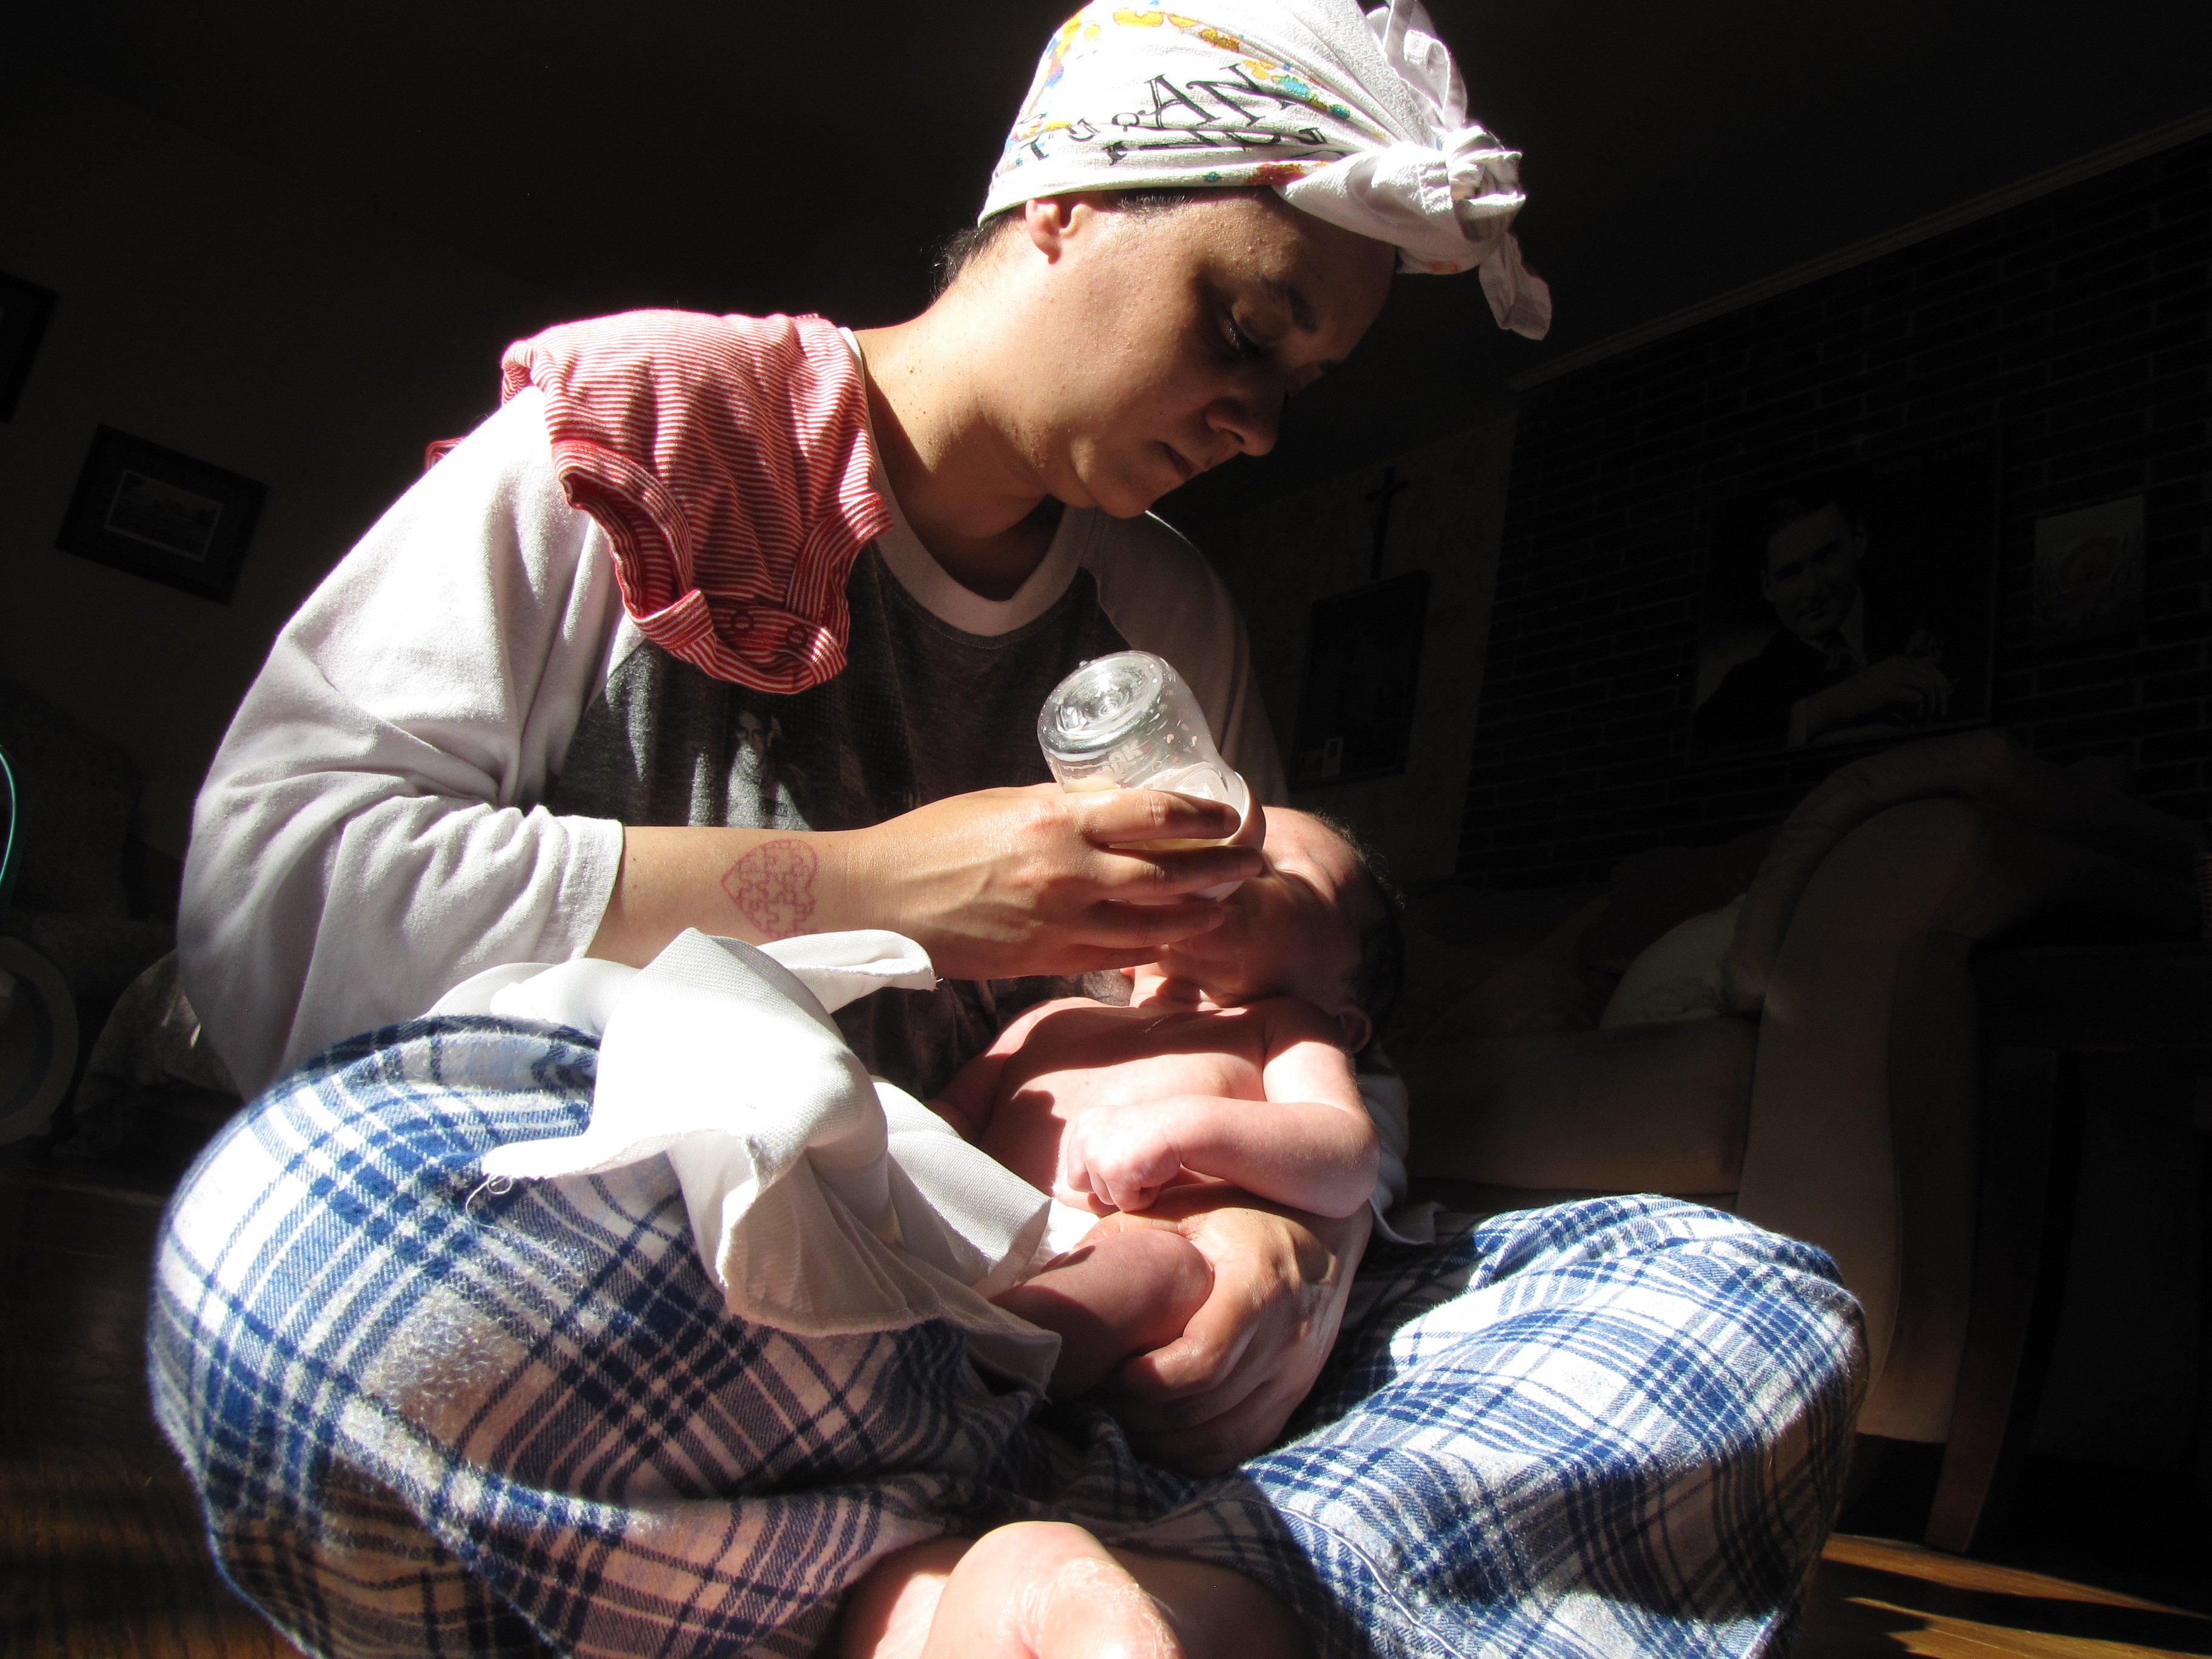 Aggressive marketing of formula milk put breastfeeding is low in Indonesia. : “Afterbath” by Gerry Dincher is available in https://bit.ly/3wuVWB1 CC BY-SA 2.0 DEED